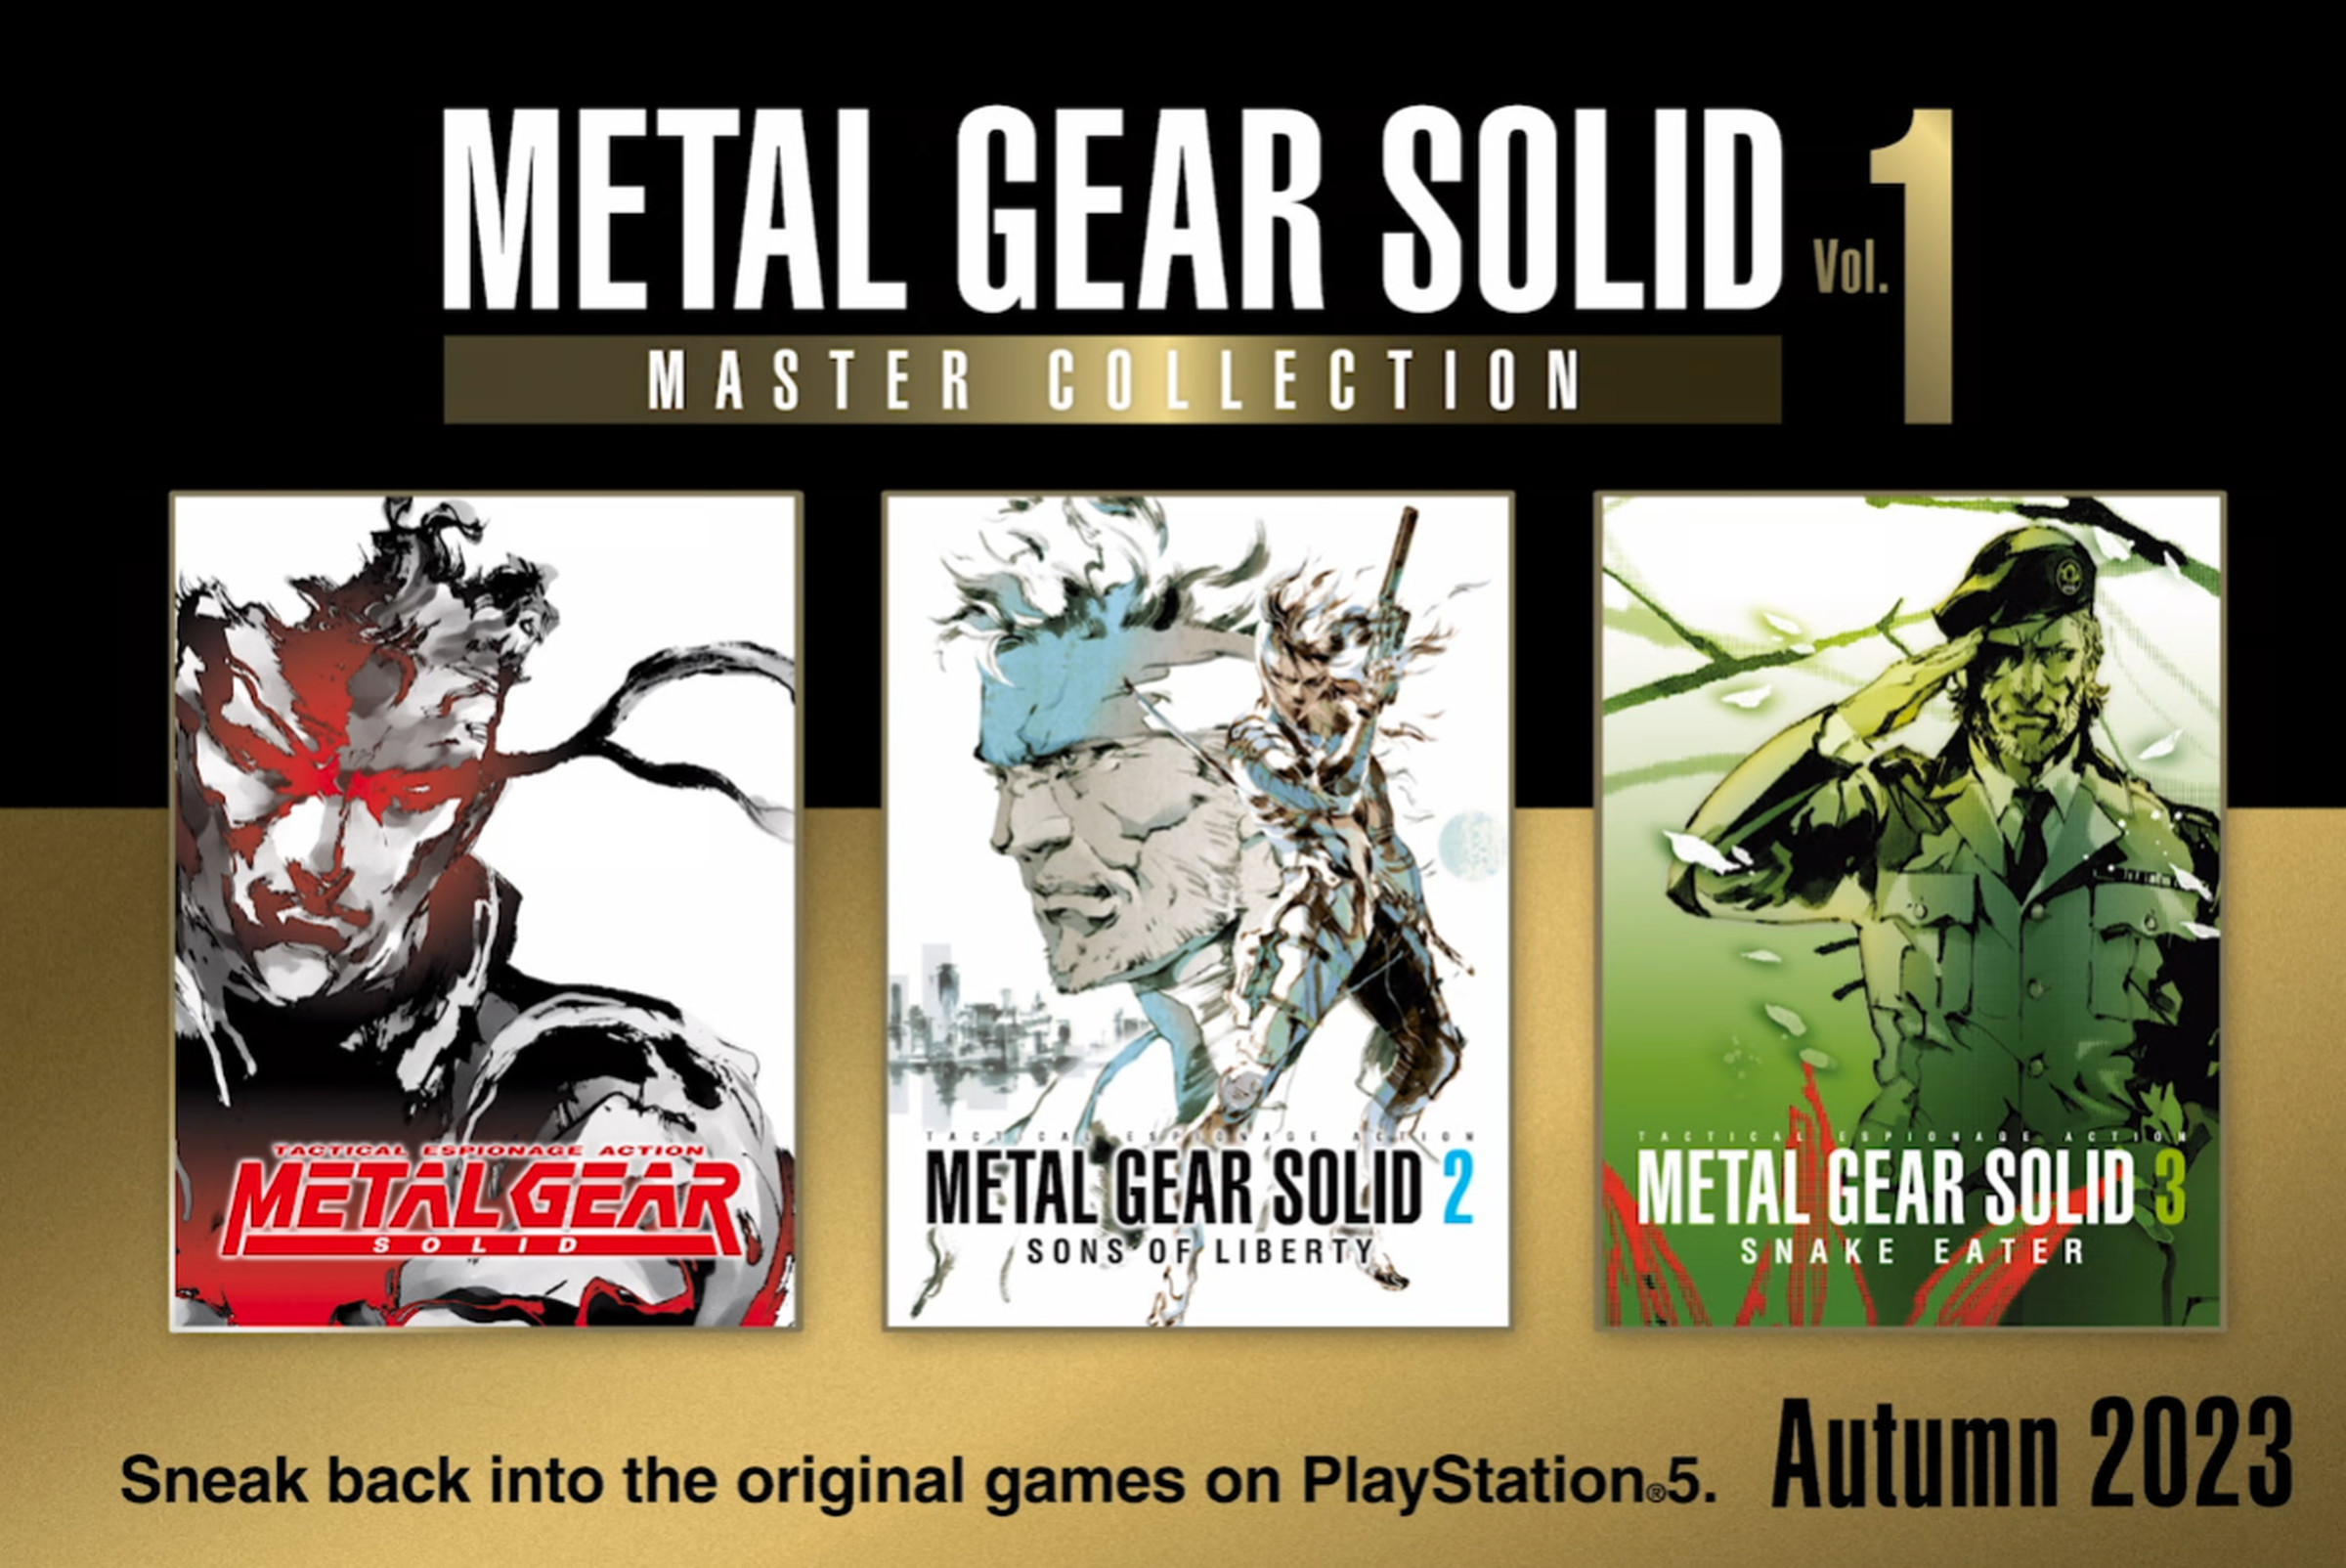 A promotional image for the new Metal Gear Solid collection.